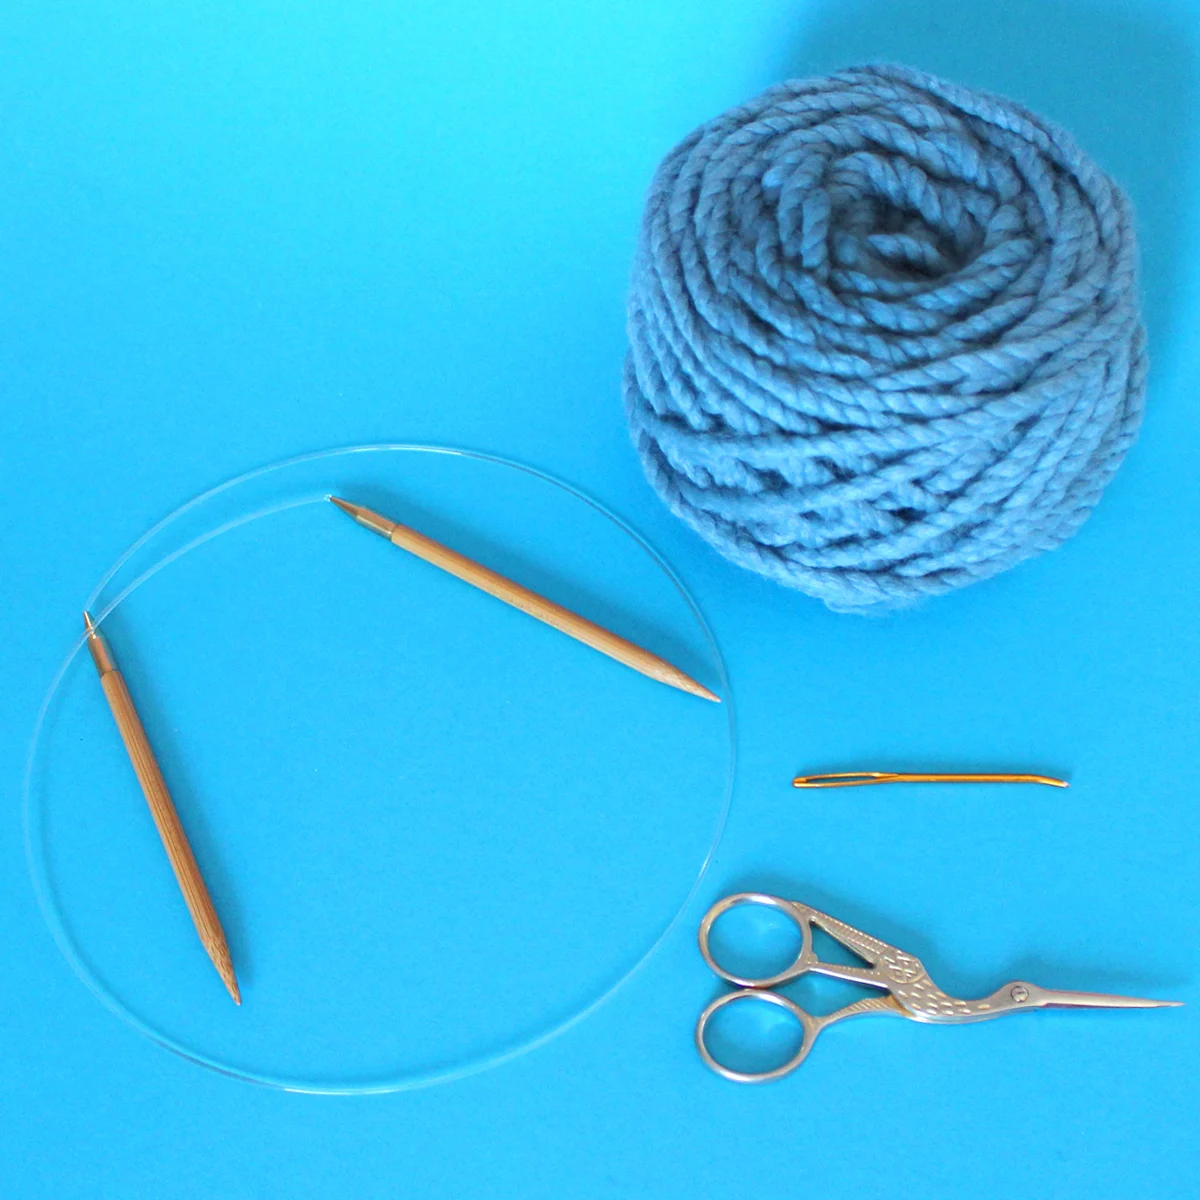 Knitting supplies of circular needle, tapestry needle, scissors, and super bulky yarn in blue color.